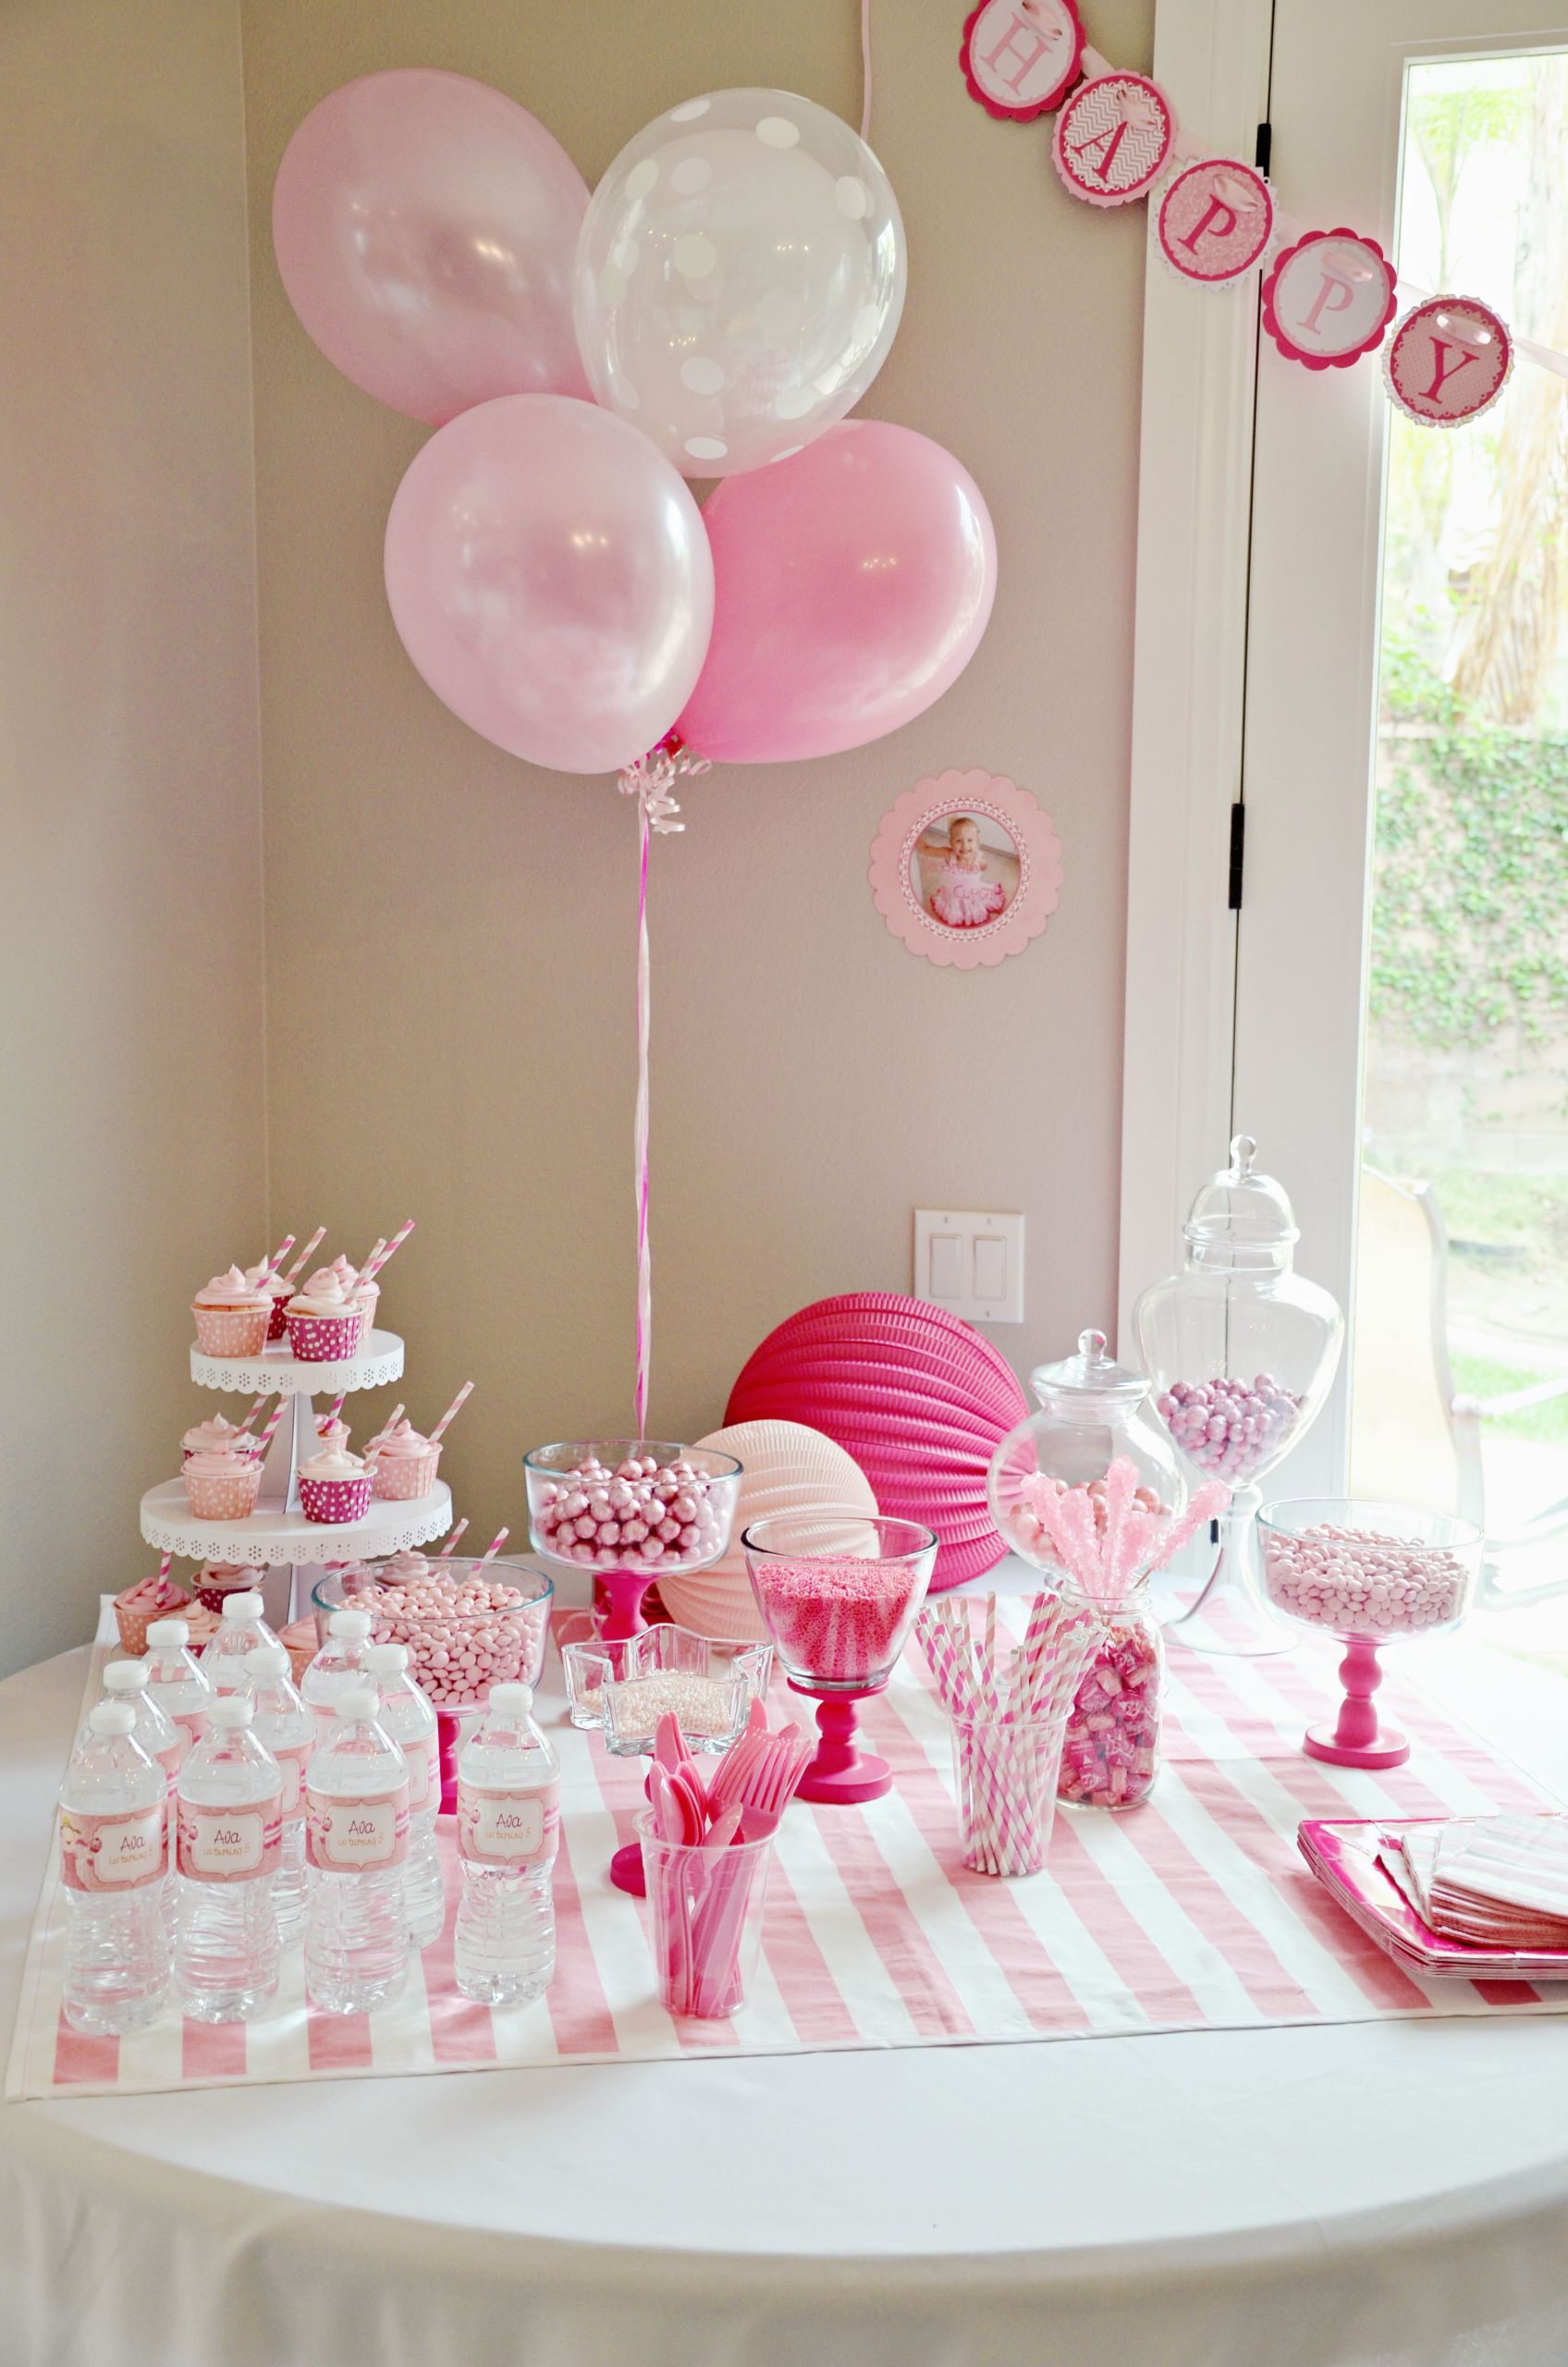 Party Theme For 1 Year Old Baby Girl
 A Pinkalicious themed party for a 3 year old